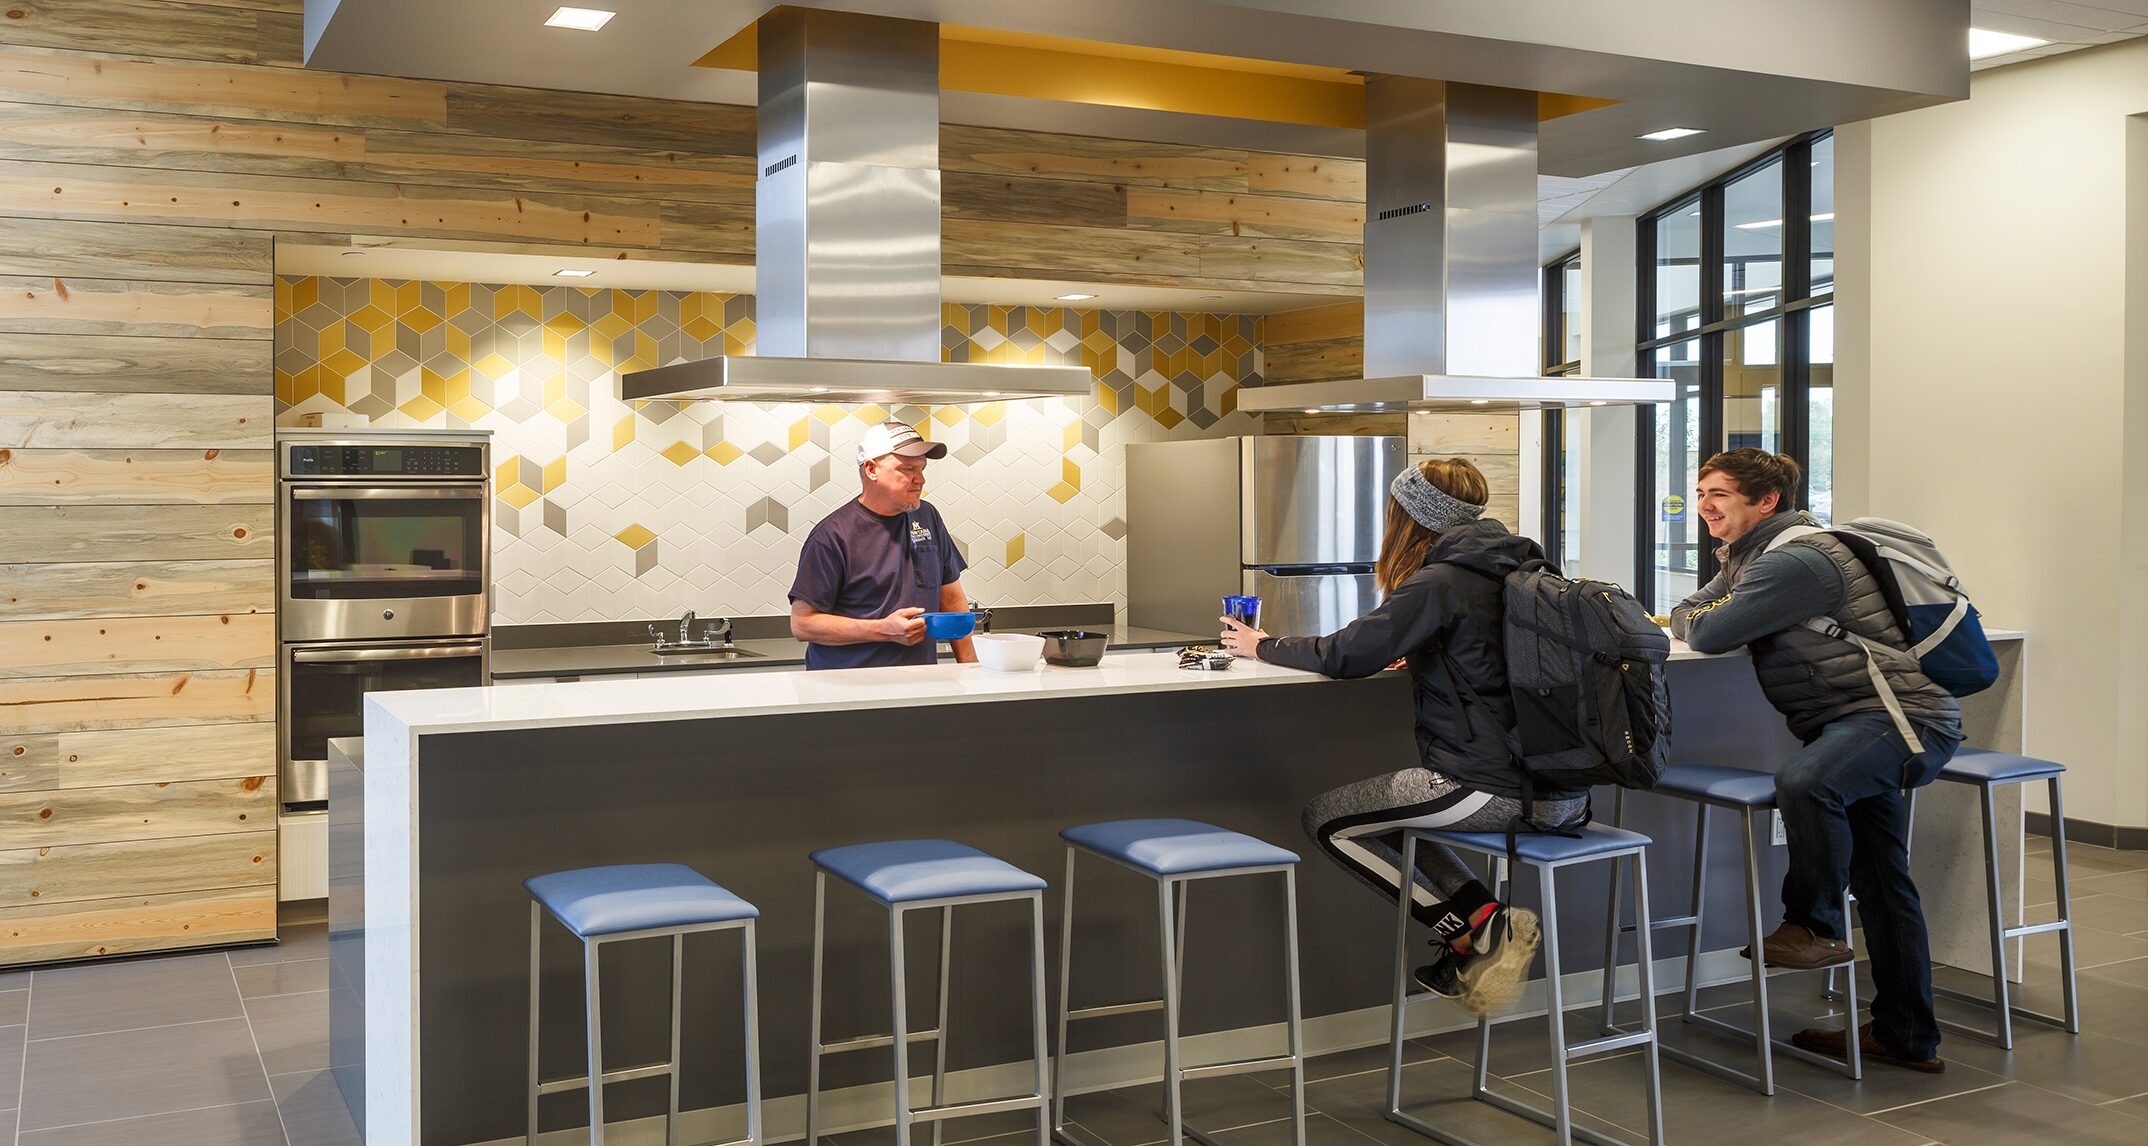 A large community kitchen located just off the main lobby gives students an opportunity to cook and share meals with each other, and meet residents from other floors that they might not see on a regular basis. 